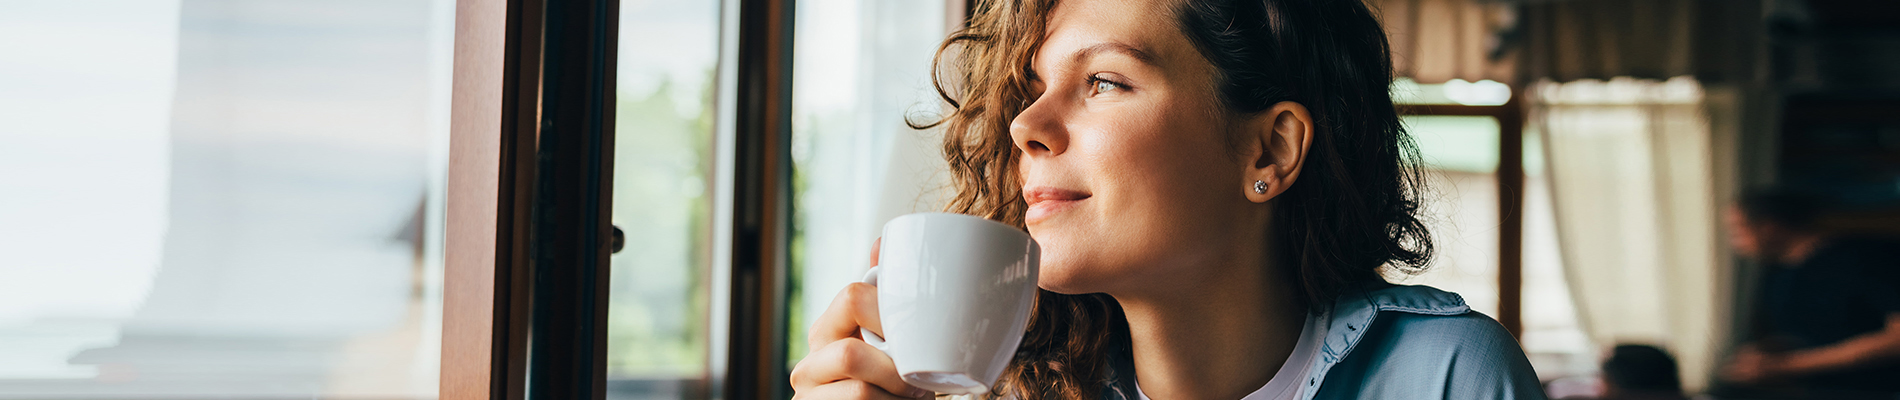 Young woman holding a cup of coffee looking out a window